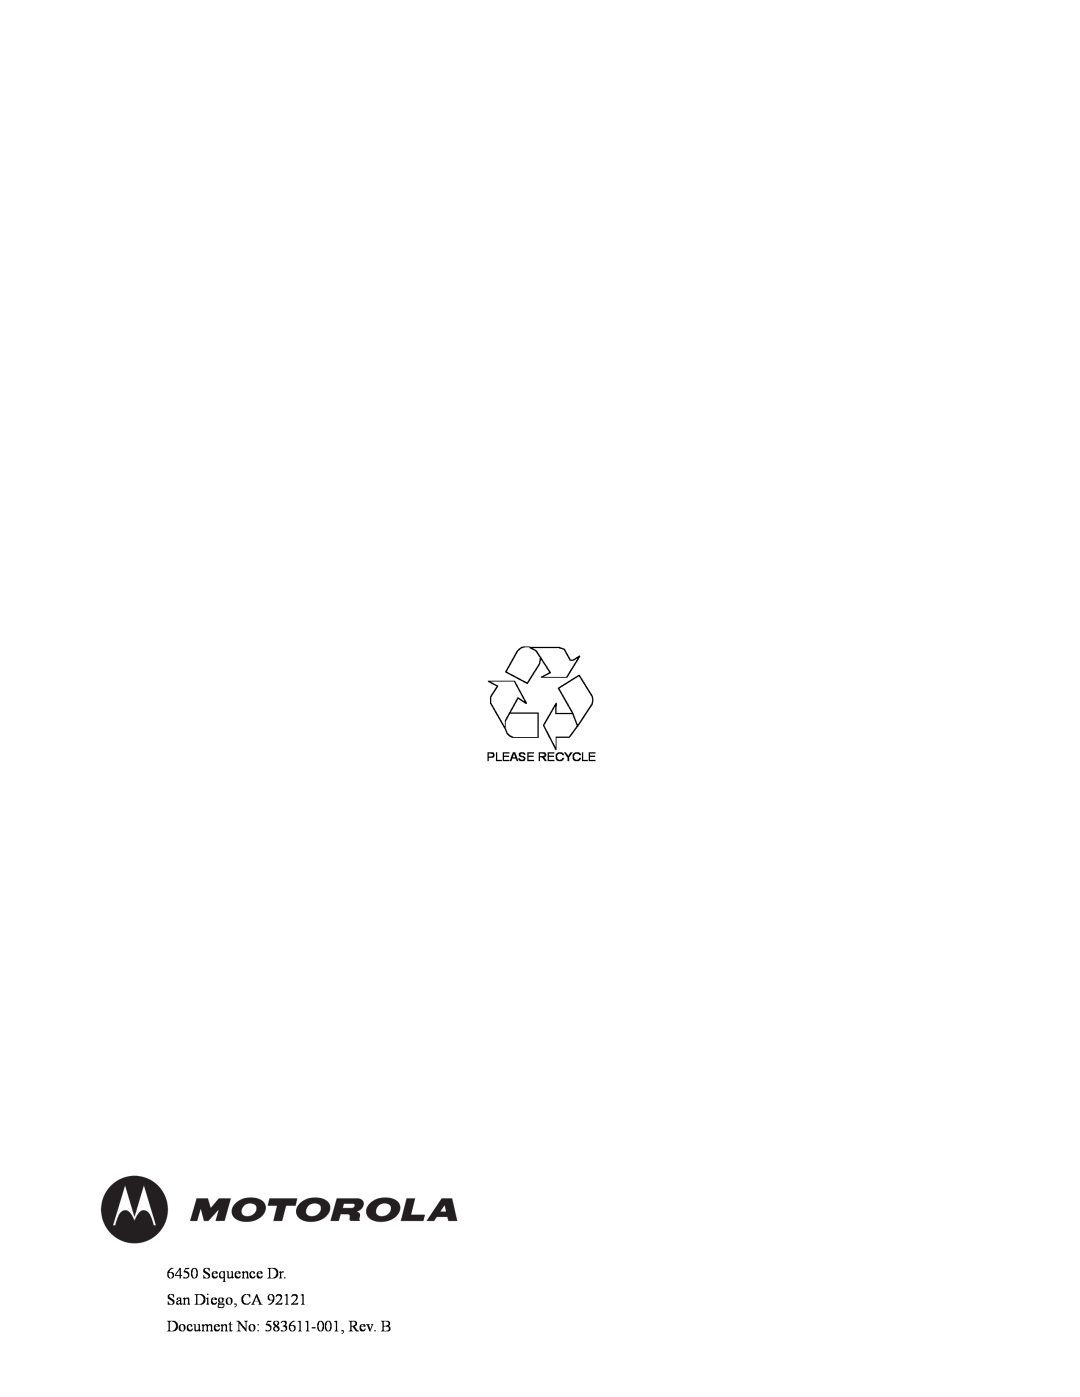 Motorola DSR-6400 manual Sequence Dr San Diego, CA, Document No 583611-001,Rev. B, Please Recycle 